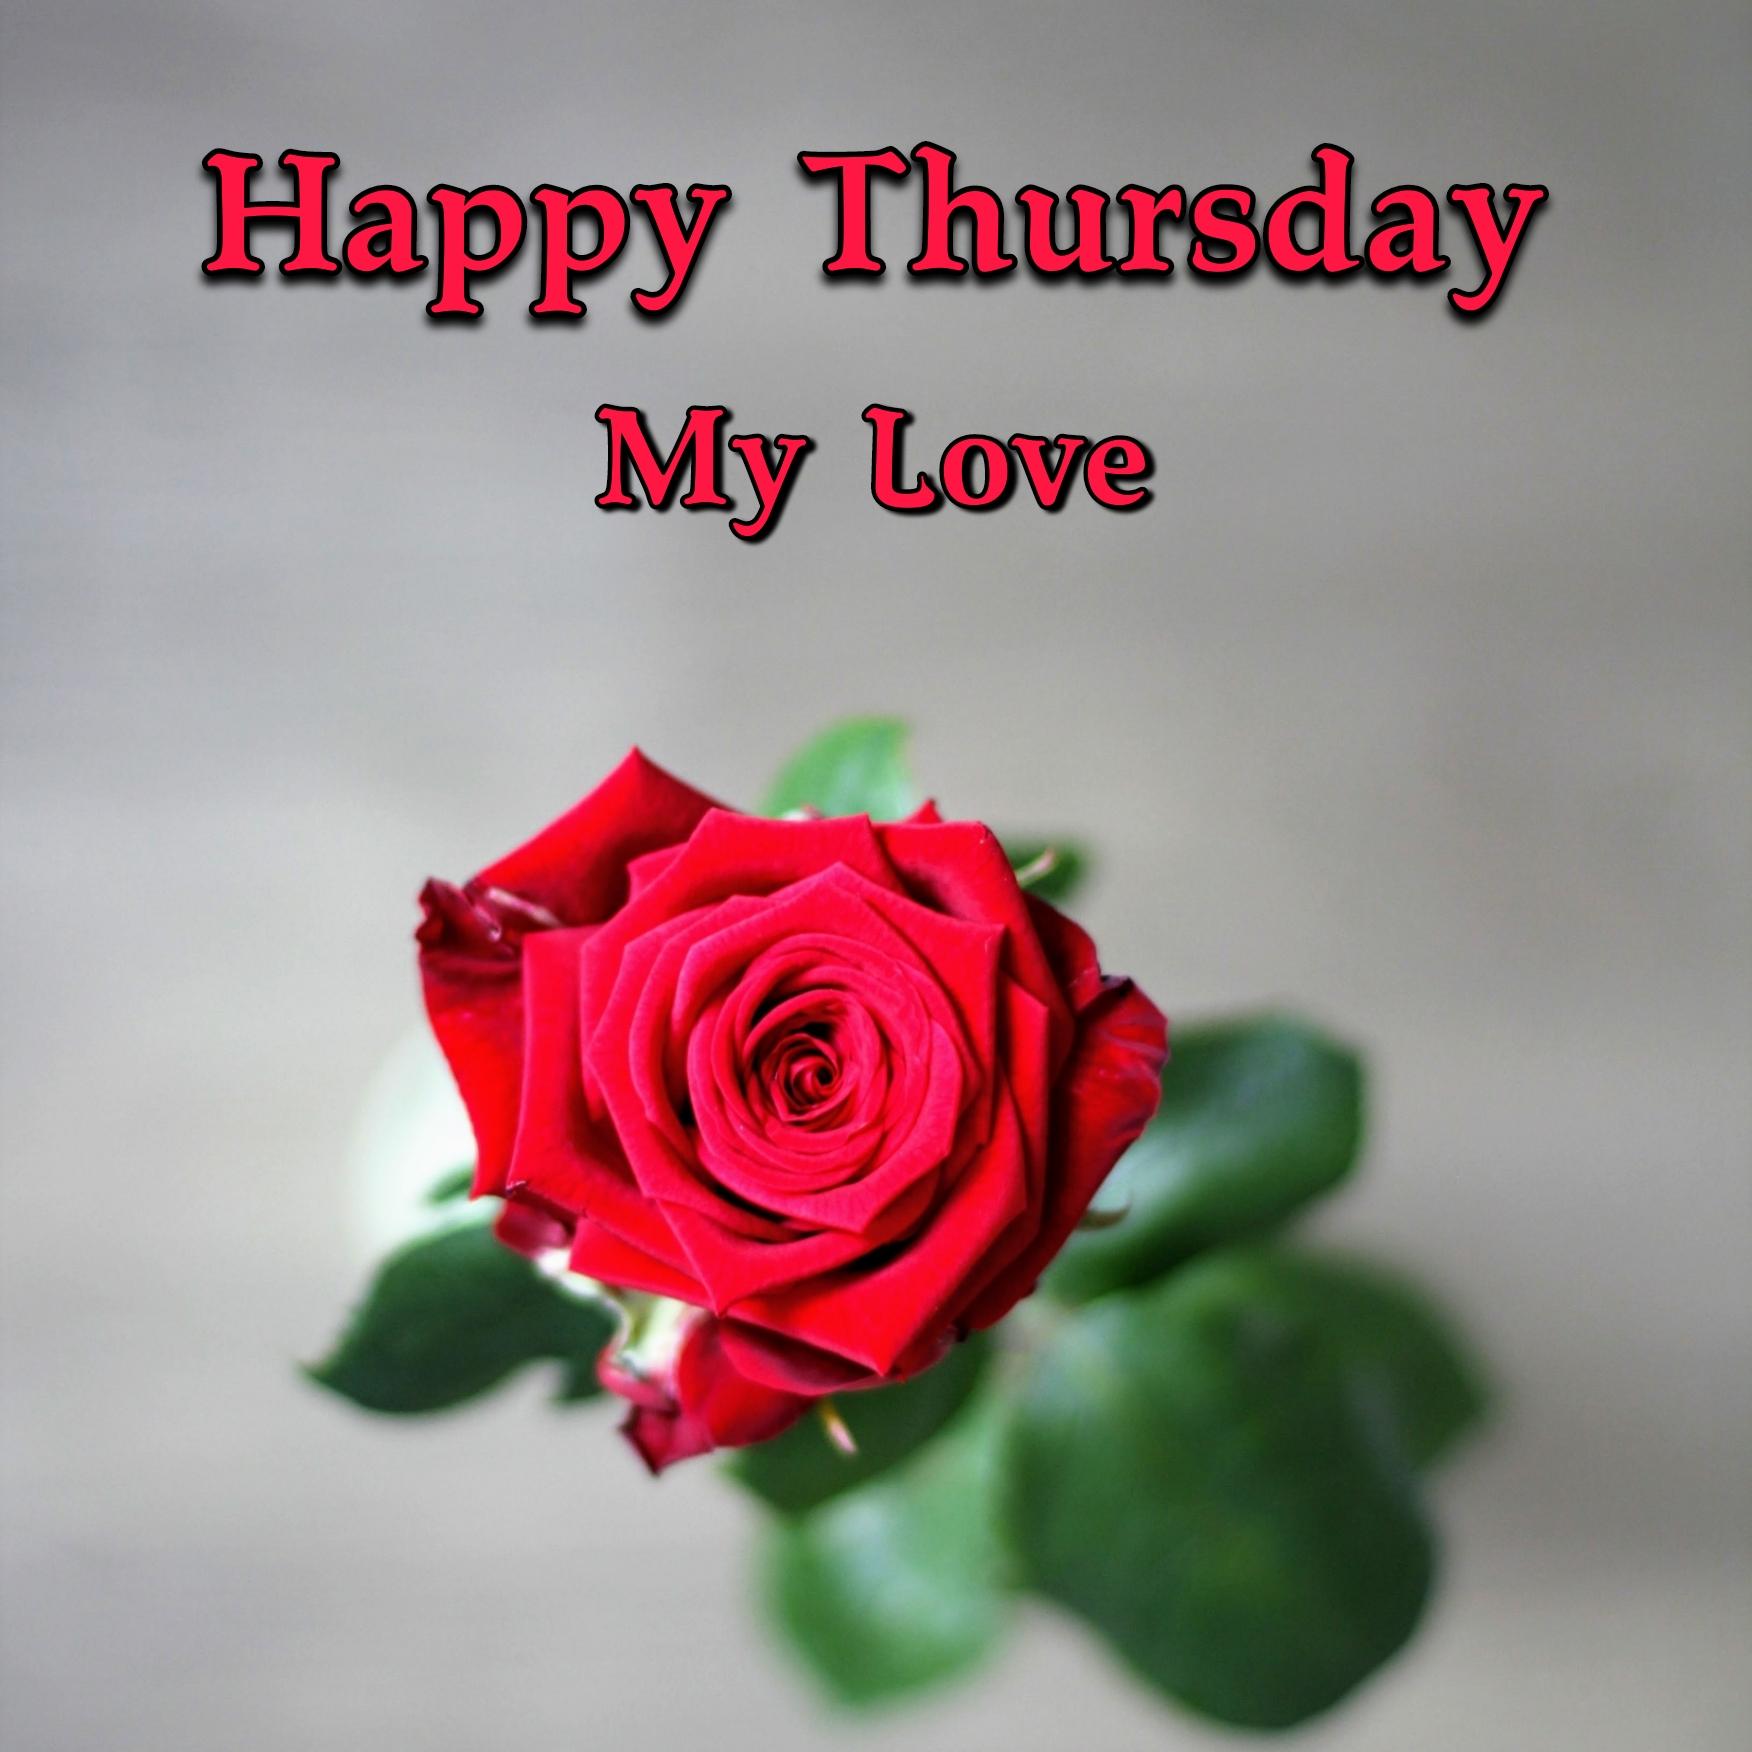 Happy Thursday My Love Images